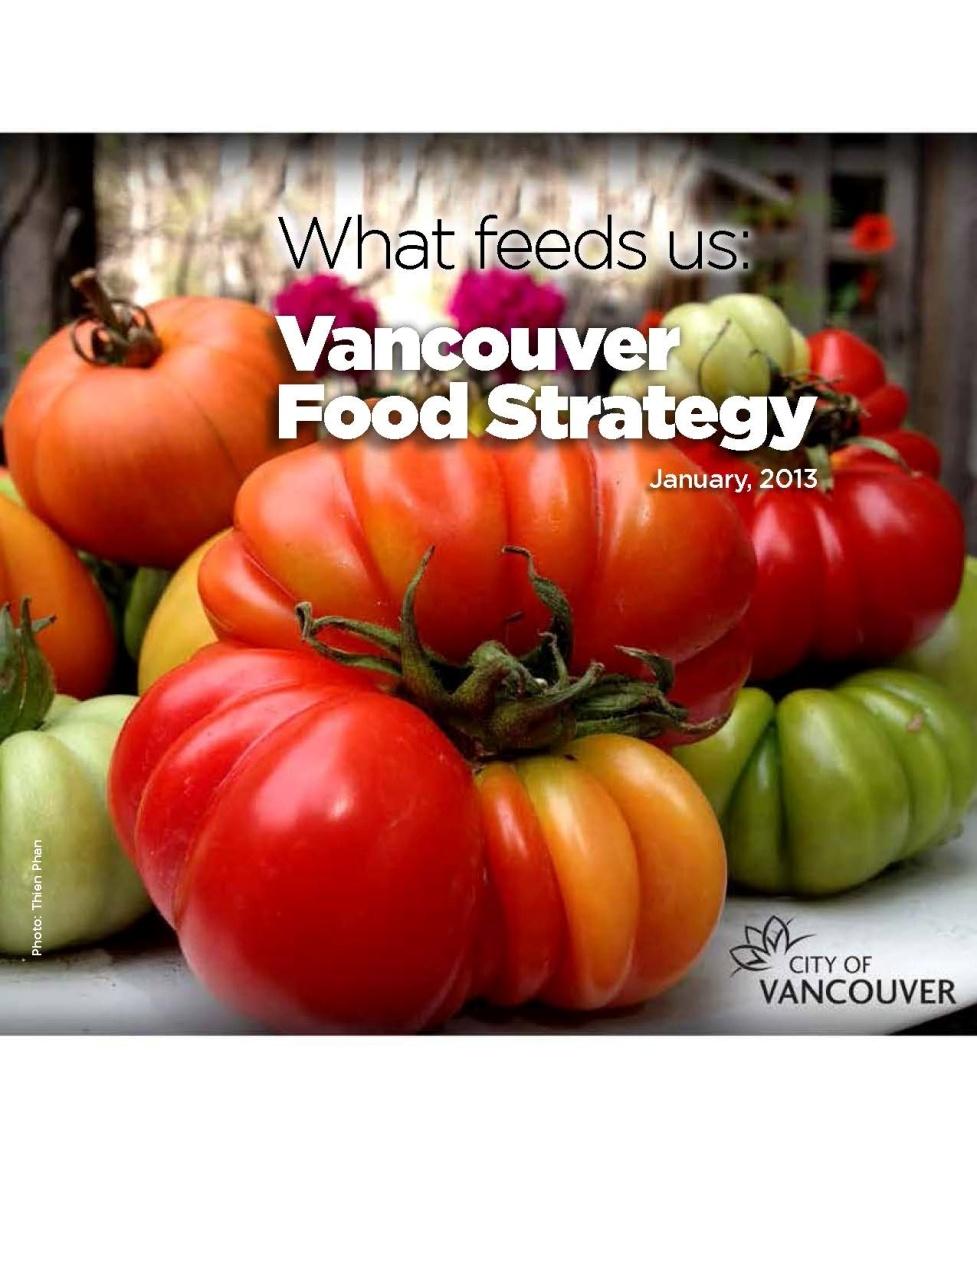 Vancouver Food Strategy Purpose: Integration and alignment of food